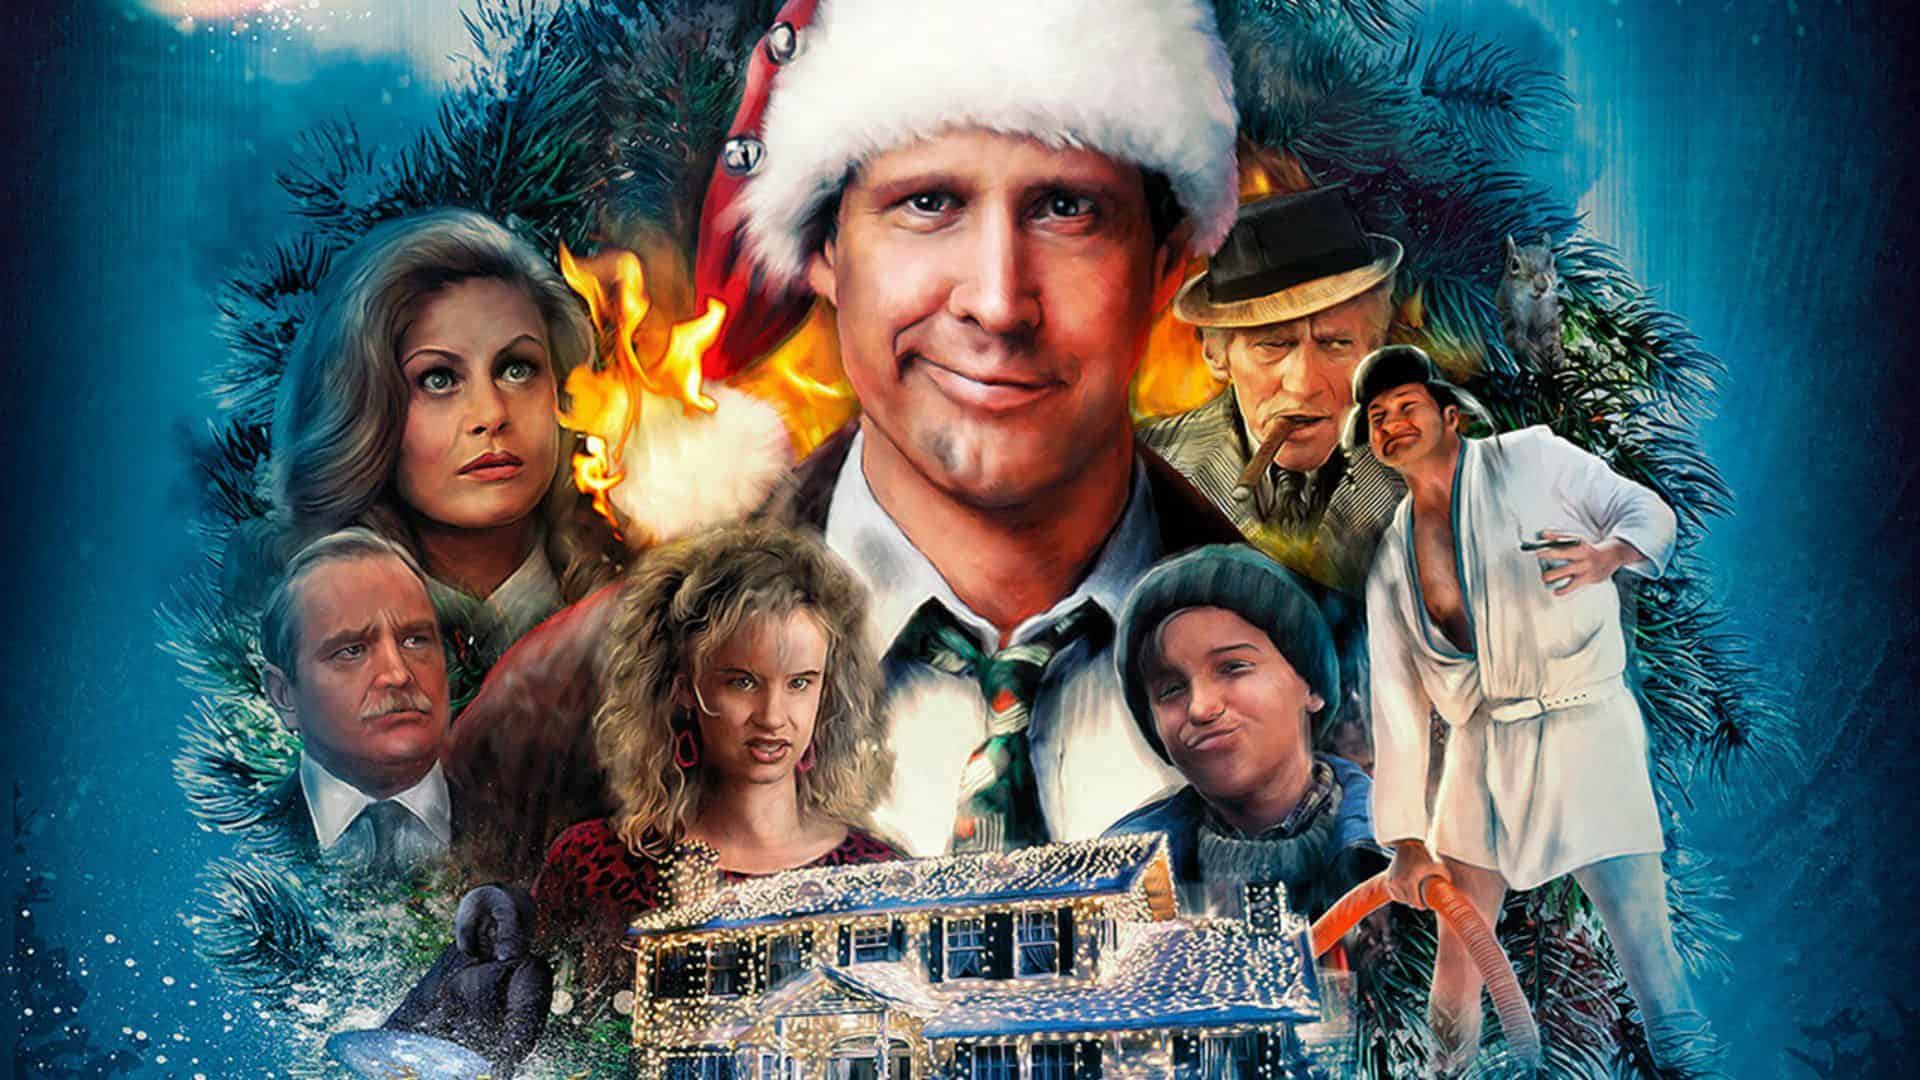 National Lampoon’s Christmas Vacation movie poster 